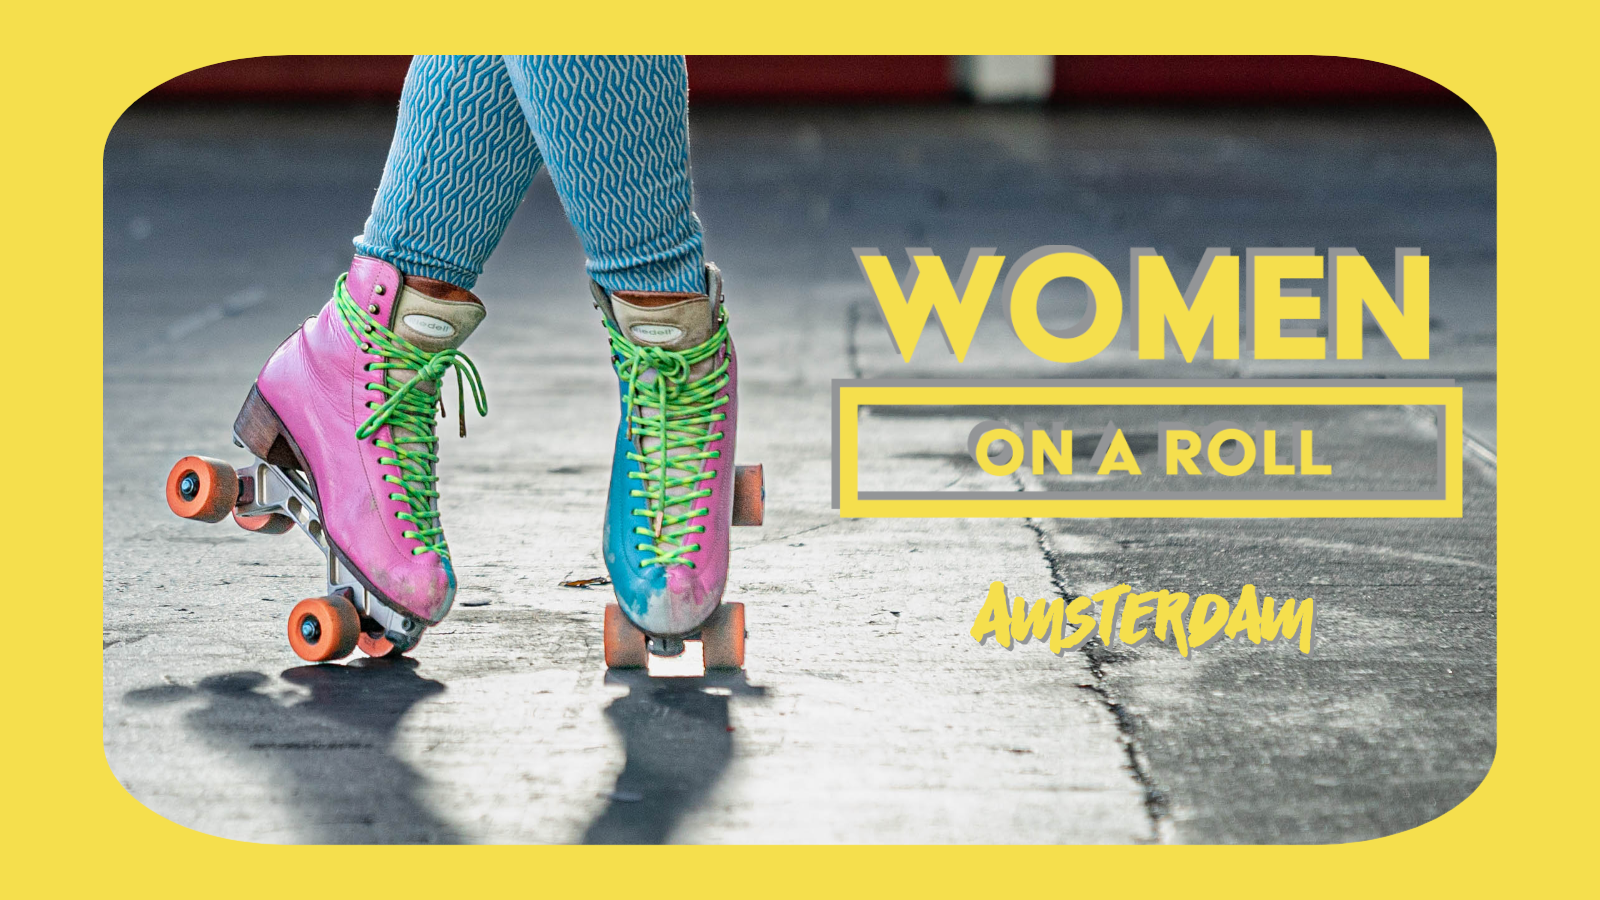 Women on a Roll - Crowdfunding promo materials